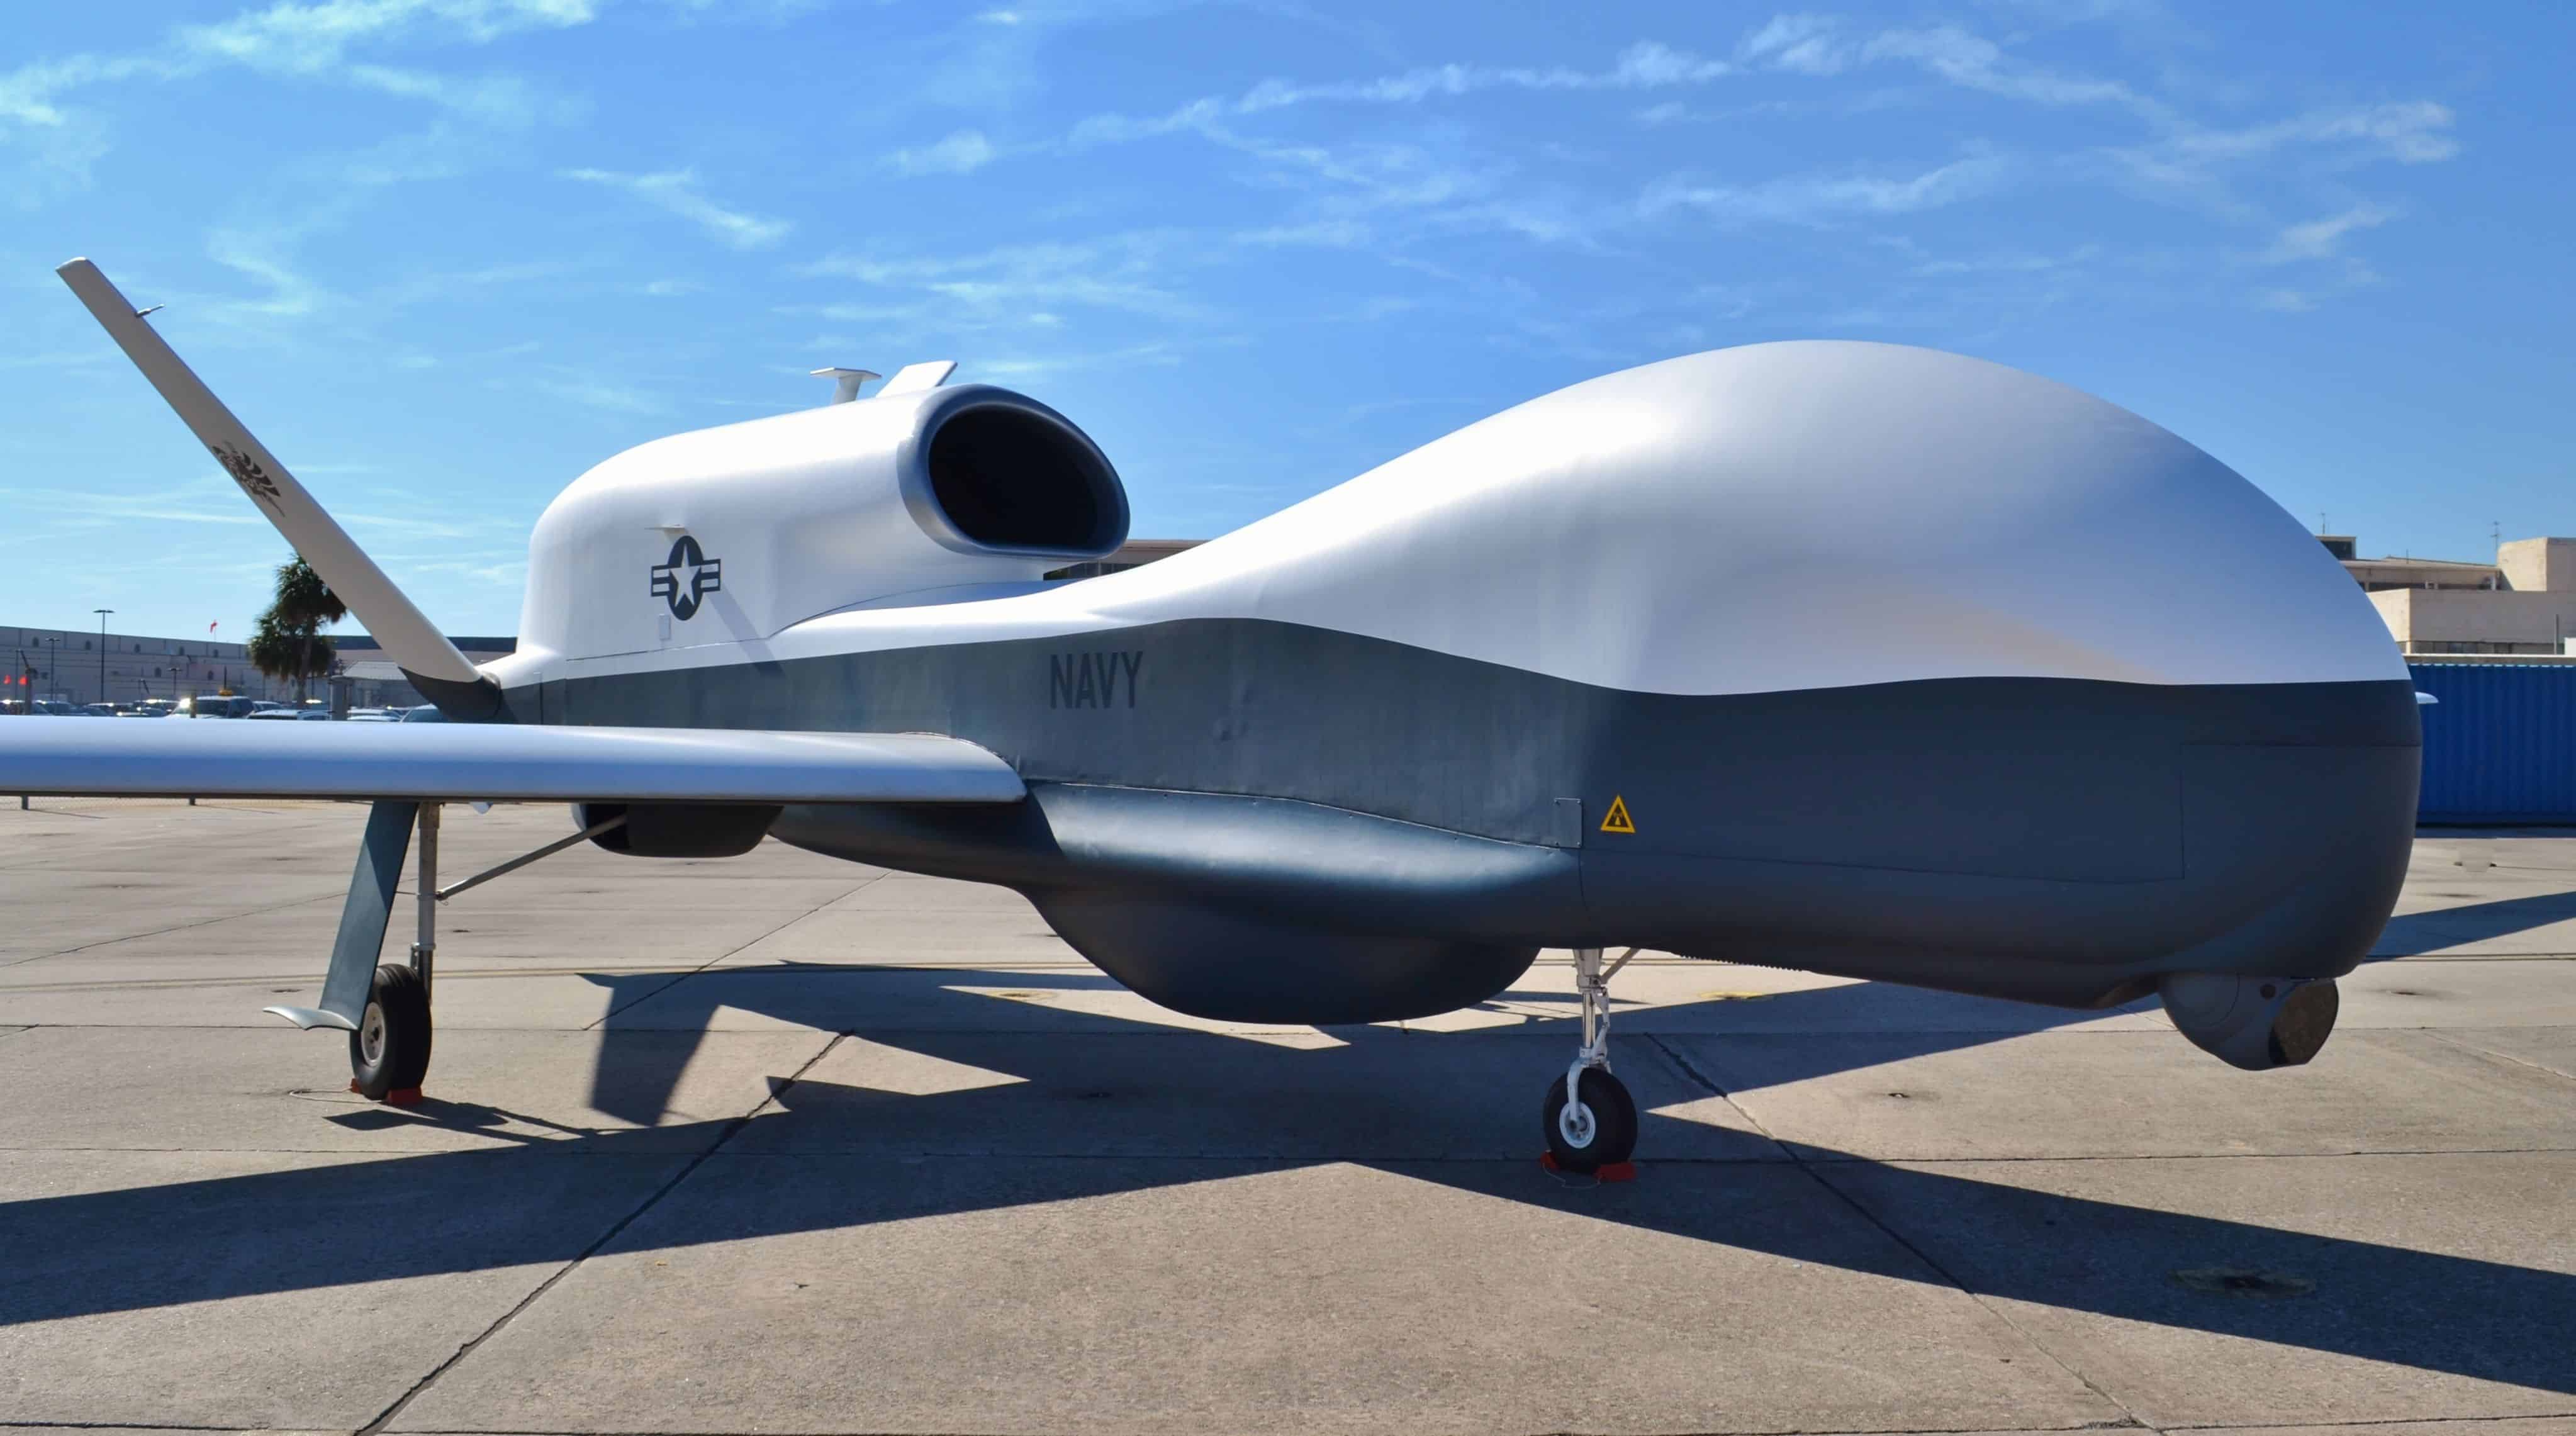 Jacksonville, Florida, USA - October 26, 2014: The U.S. Navy's MQ-4C Triton surveillance drone, also known as a UAV/UAS/unmanned aerial vehicle/BAMS, at a naval base in Jacksonville, Florida